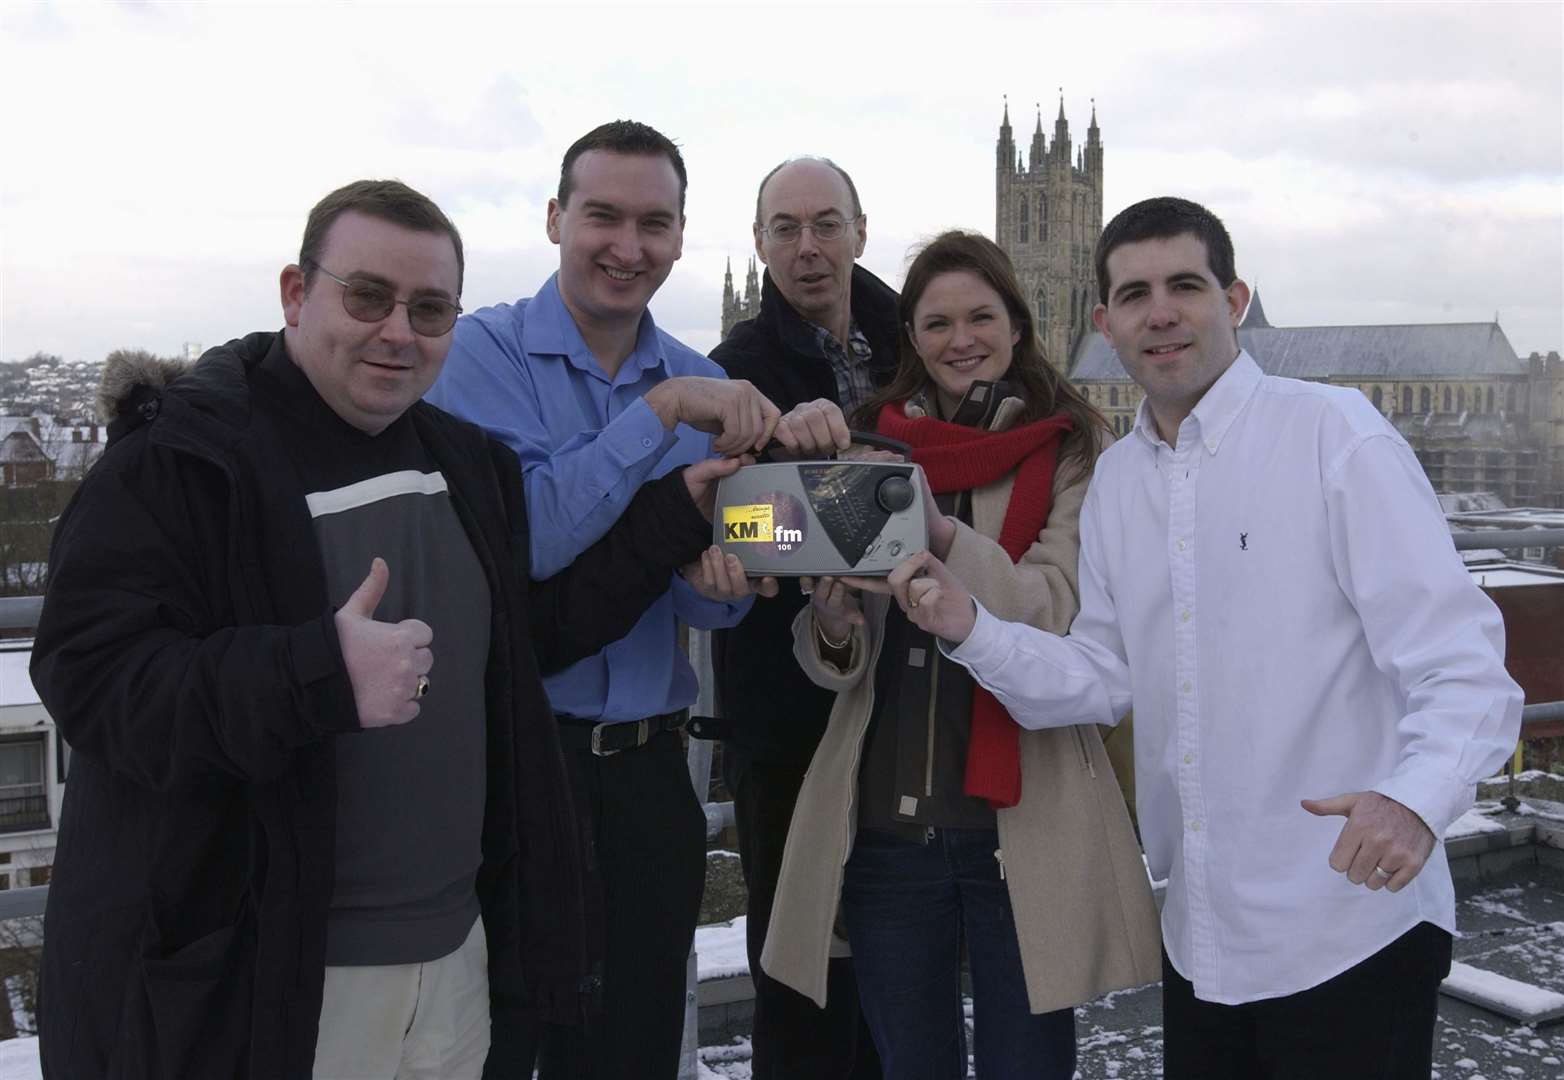 Doc Atherton (left) with his KMFM colleagues, N.J. Fields, Bob Mower, Sara Saunders and Tony Dibbin. Picture: Jim Bell